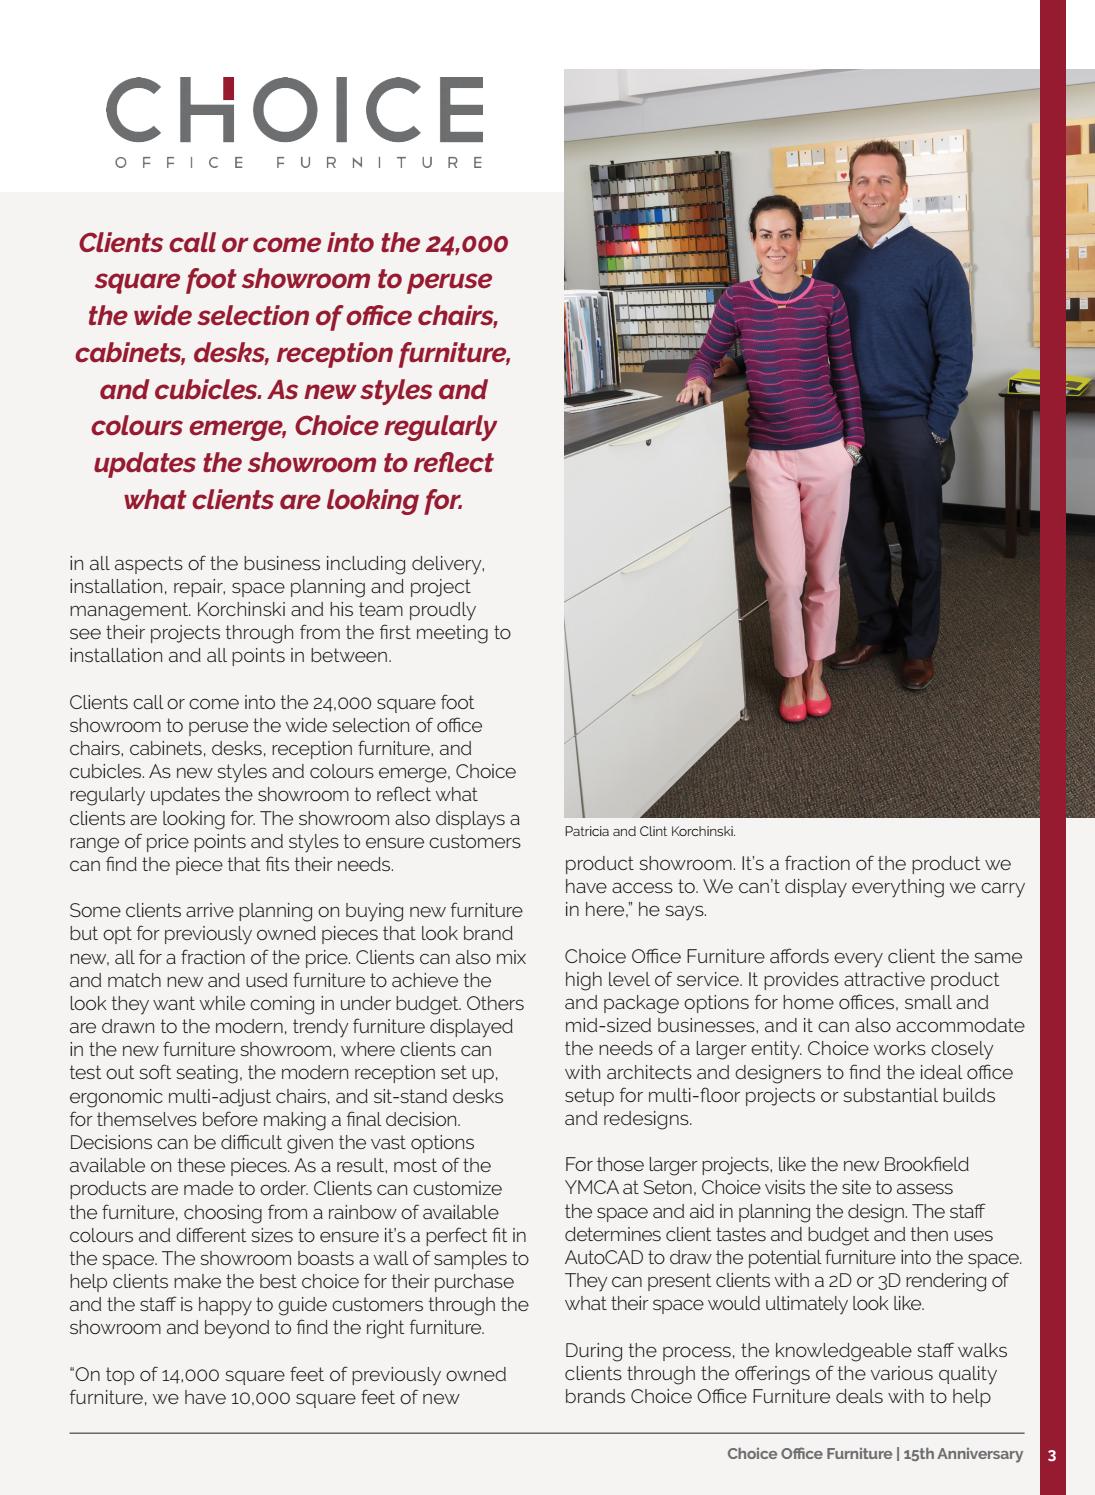 Business in Calgary Magazine - Business Profile for Choice Office Furniture